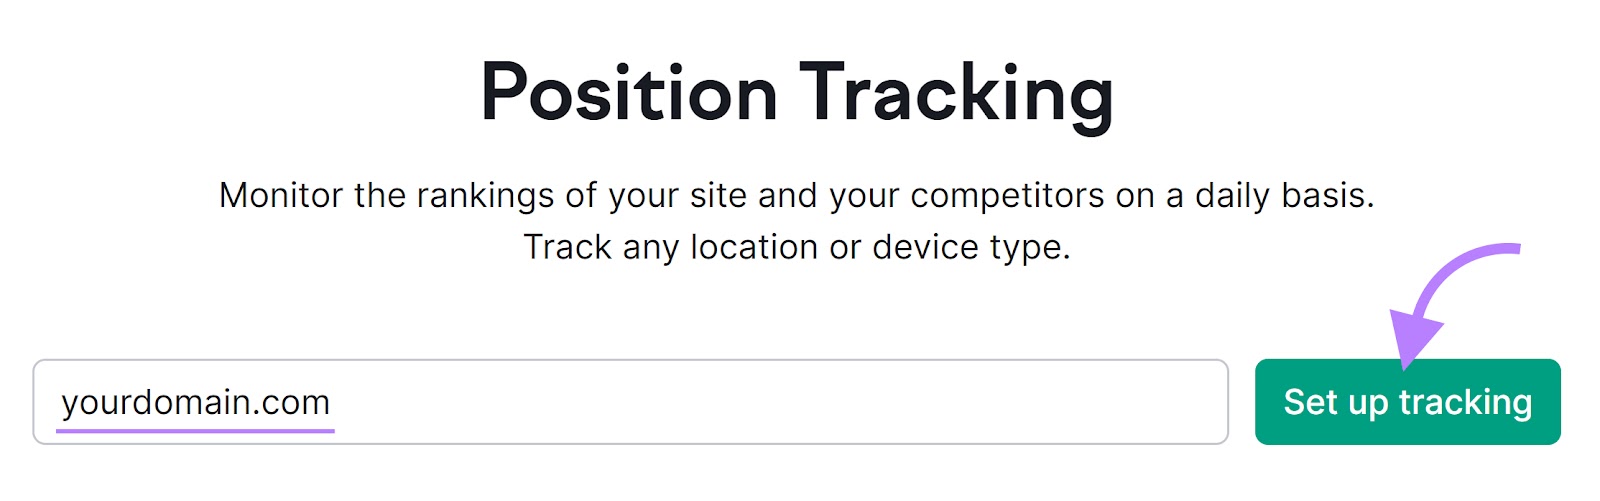 Position Tracking tool with "yourdomain.com" in the text field and the "Set up tracking" button highlighted.